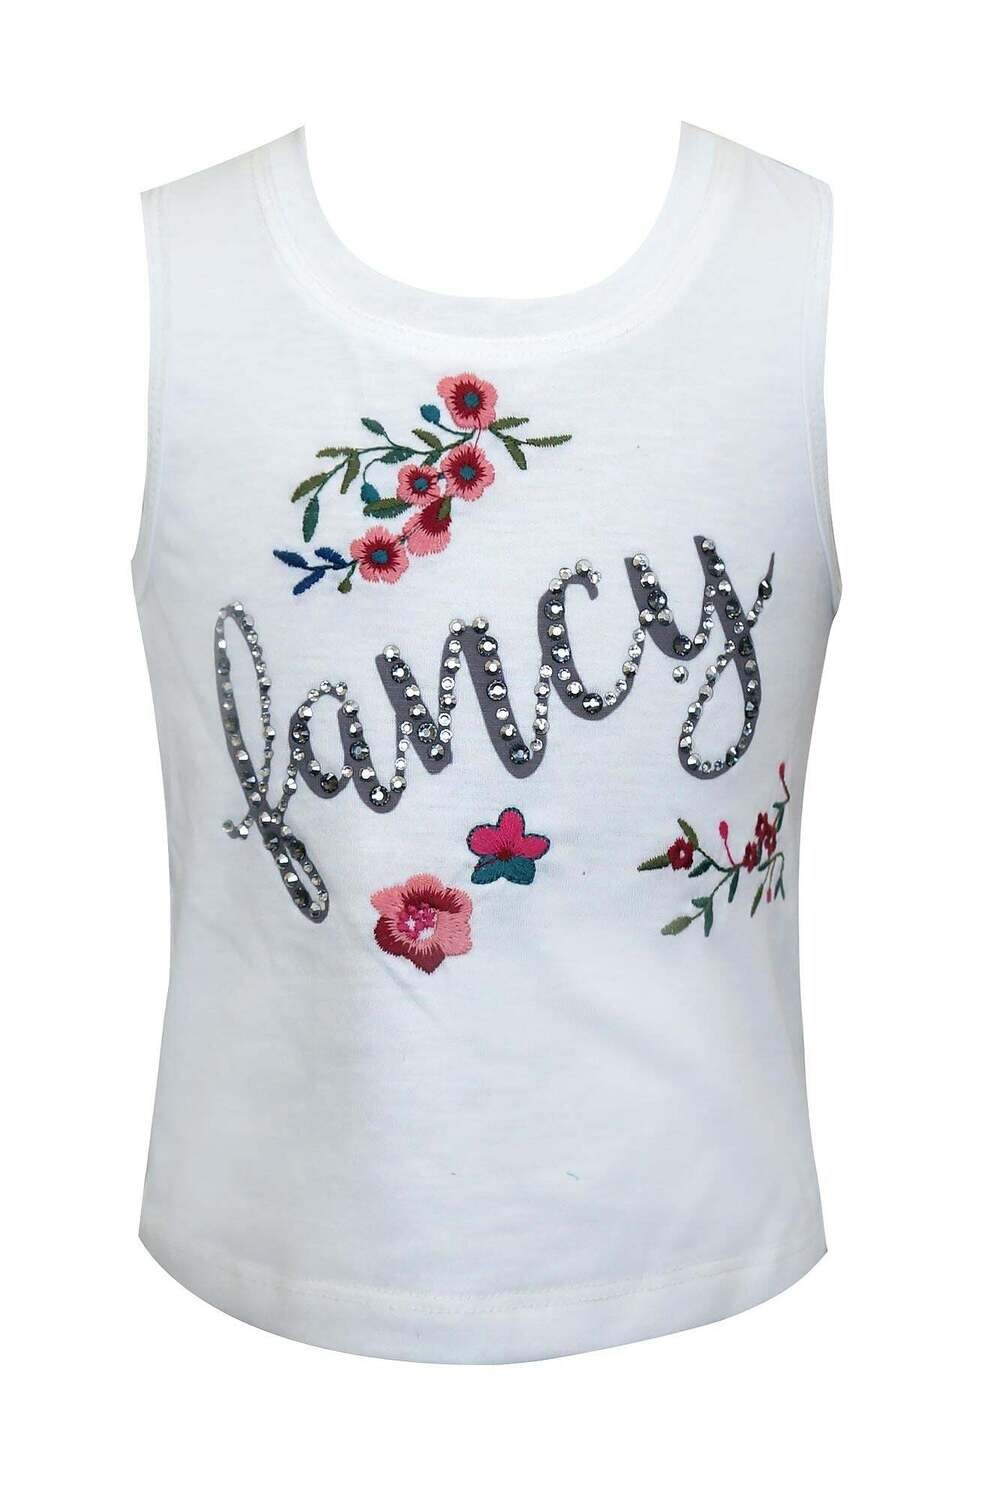 Baby Sara Tank Top w/ Fancy Print And Embroidery